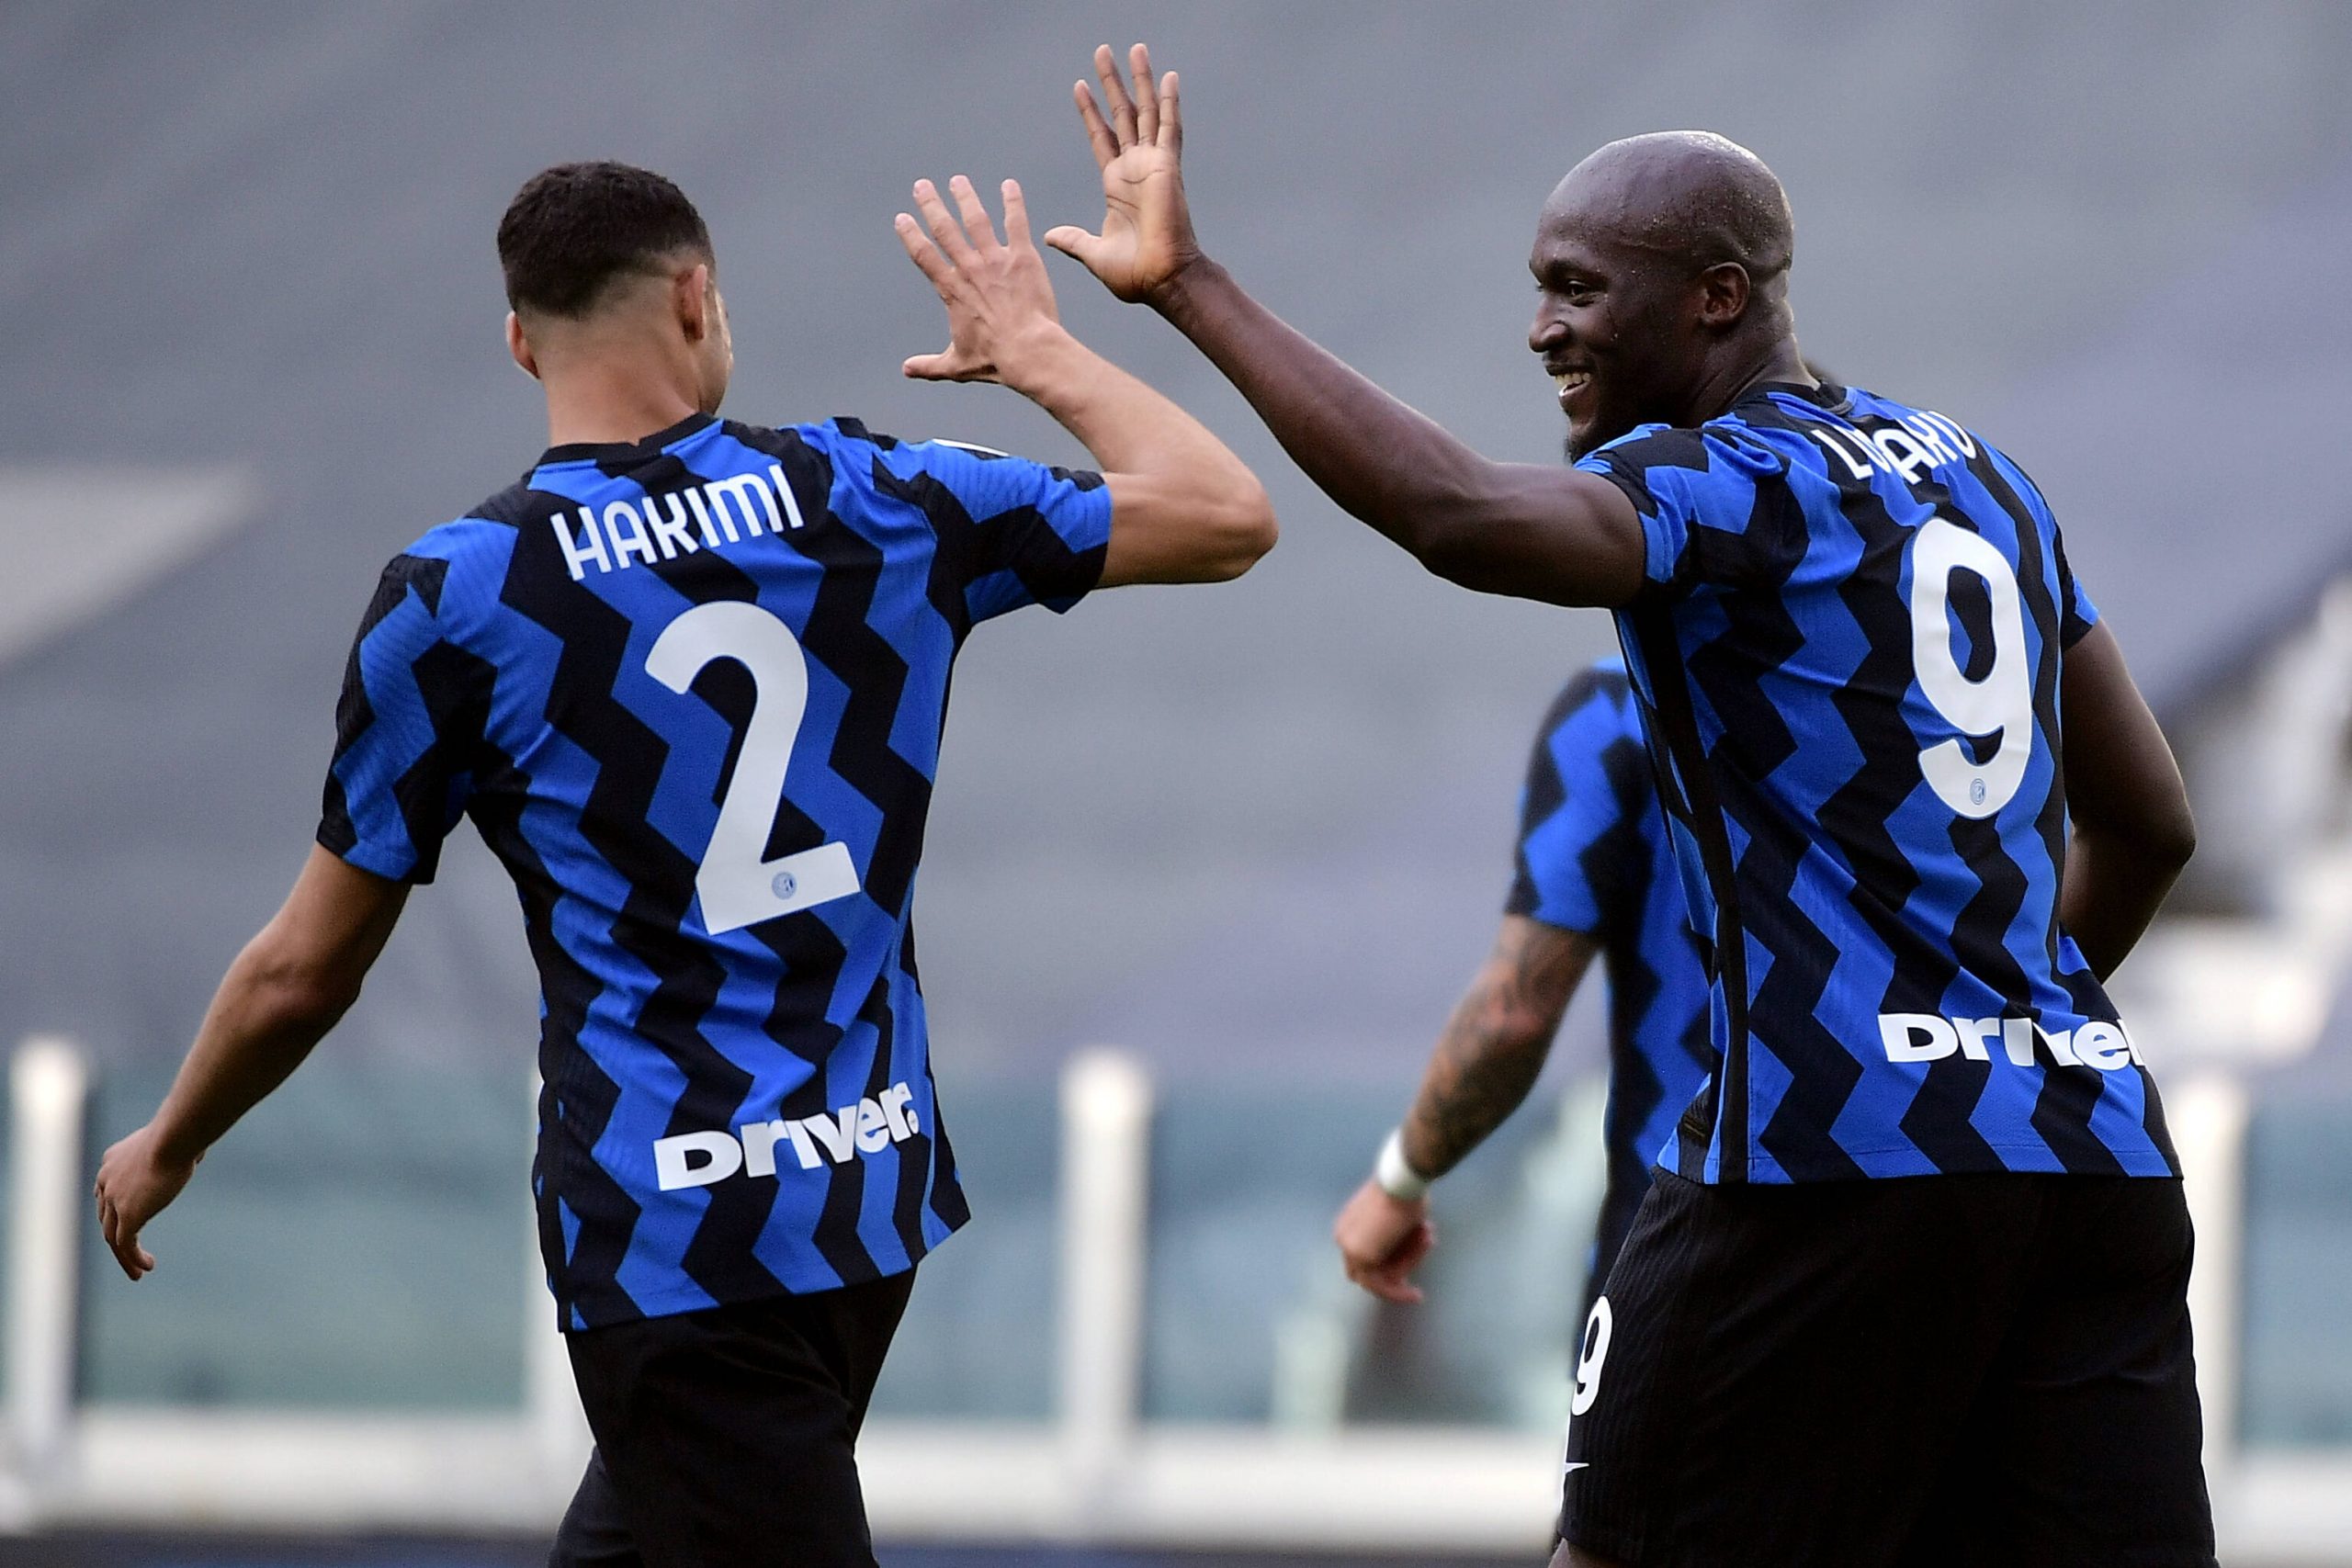 Both Achraf Hakimi and Romelu Lukaku won the Serie A title with Inter Milan this year and are linked with a transfer to Chelsea.